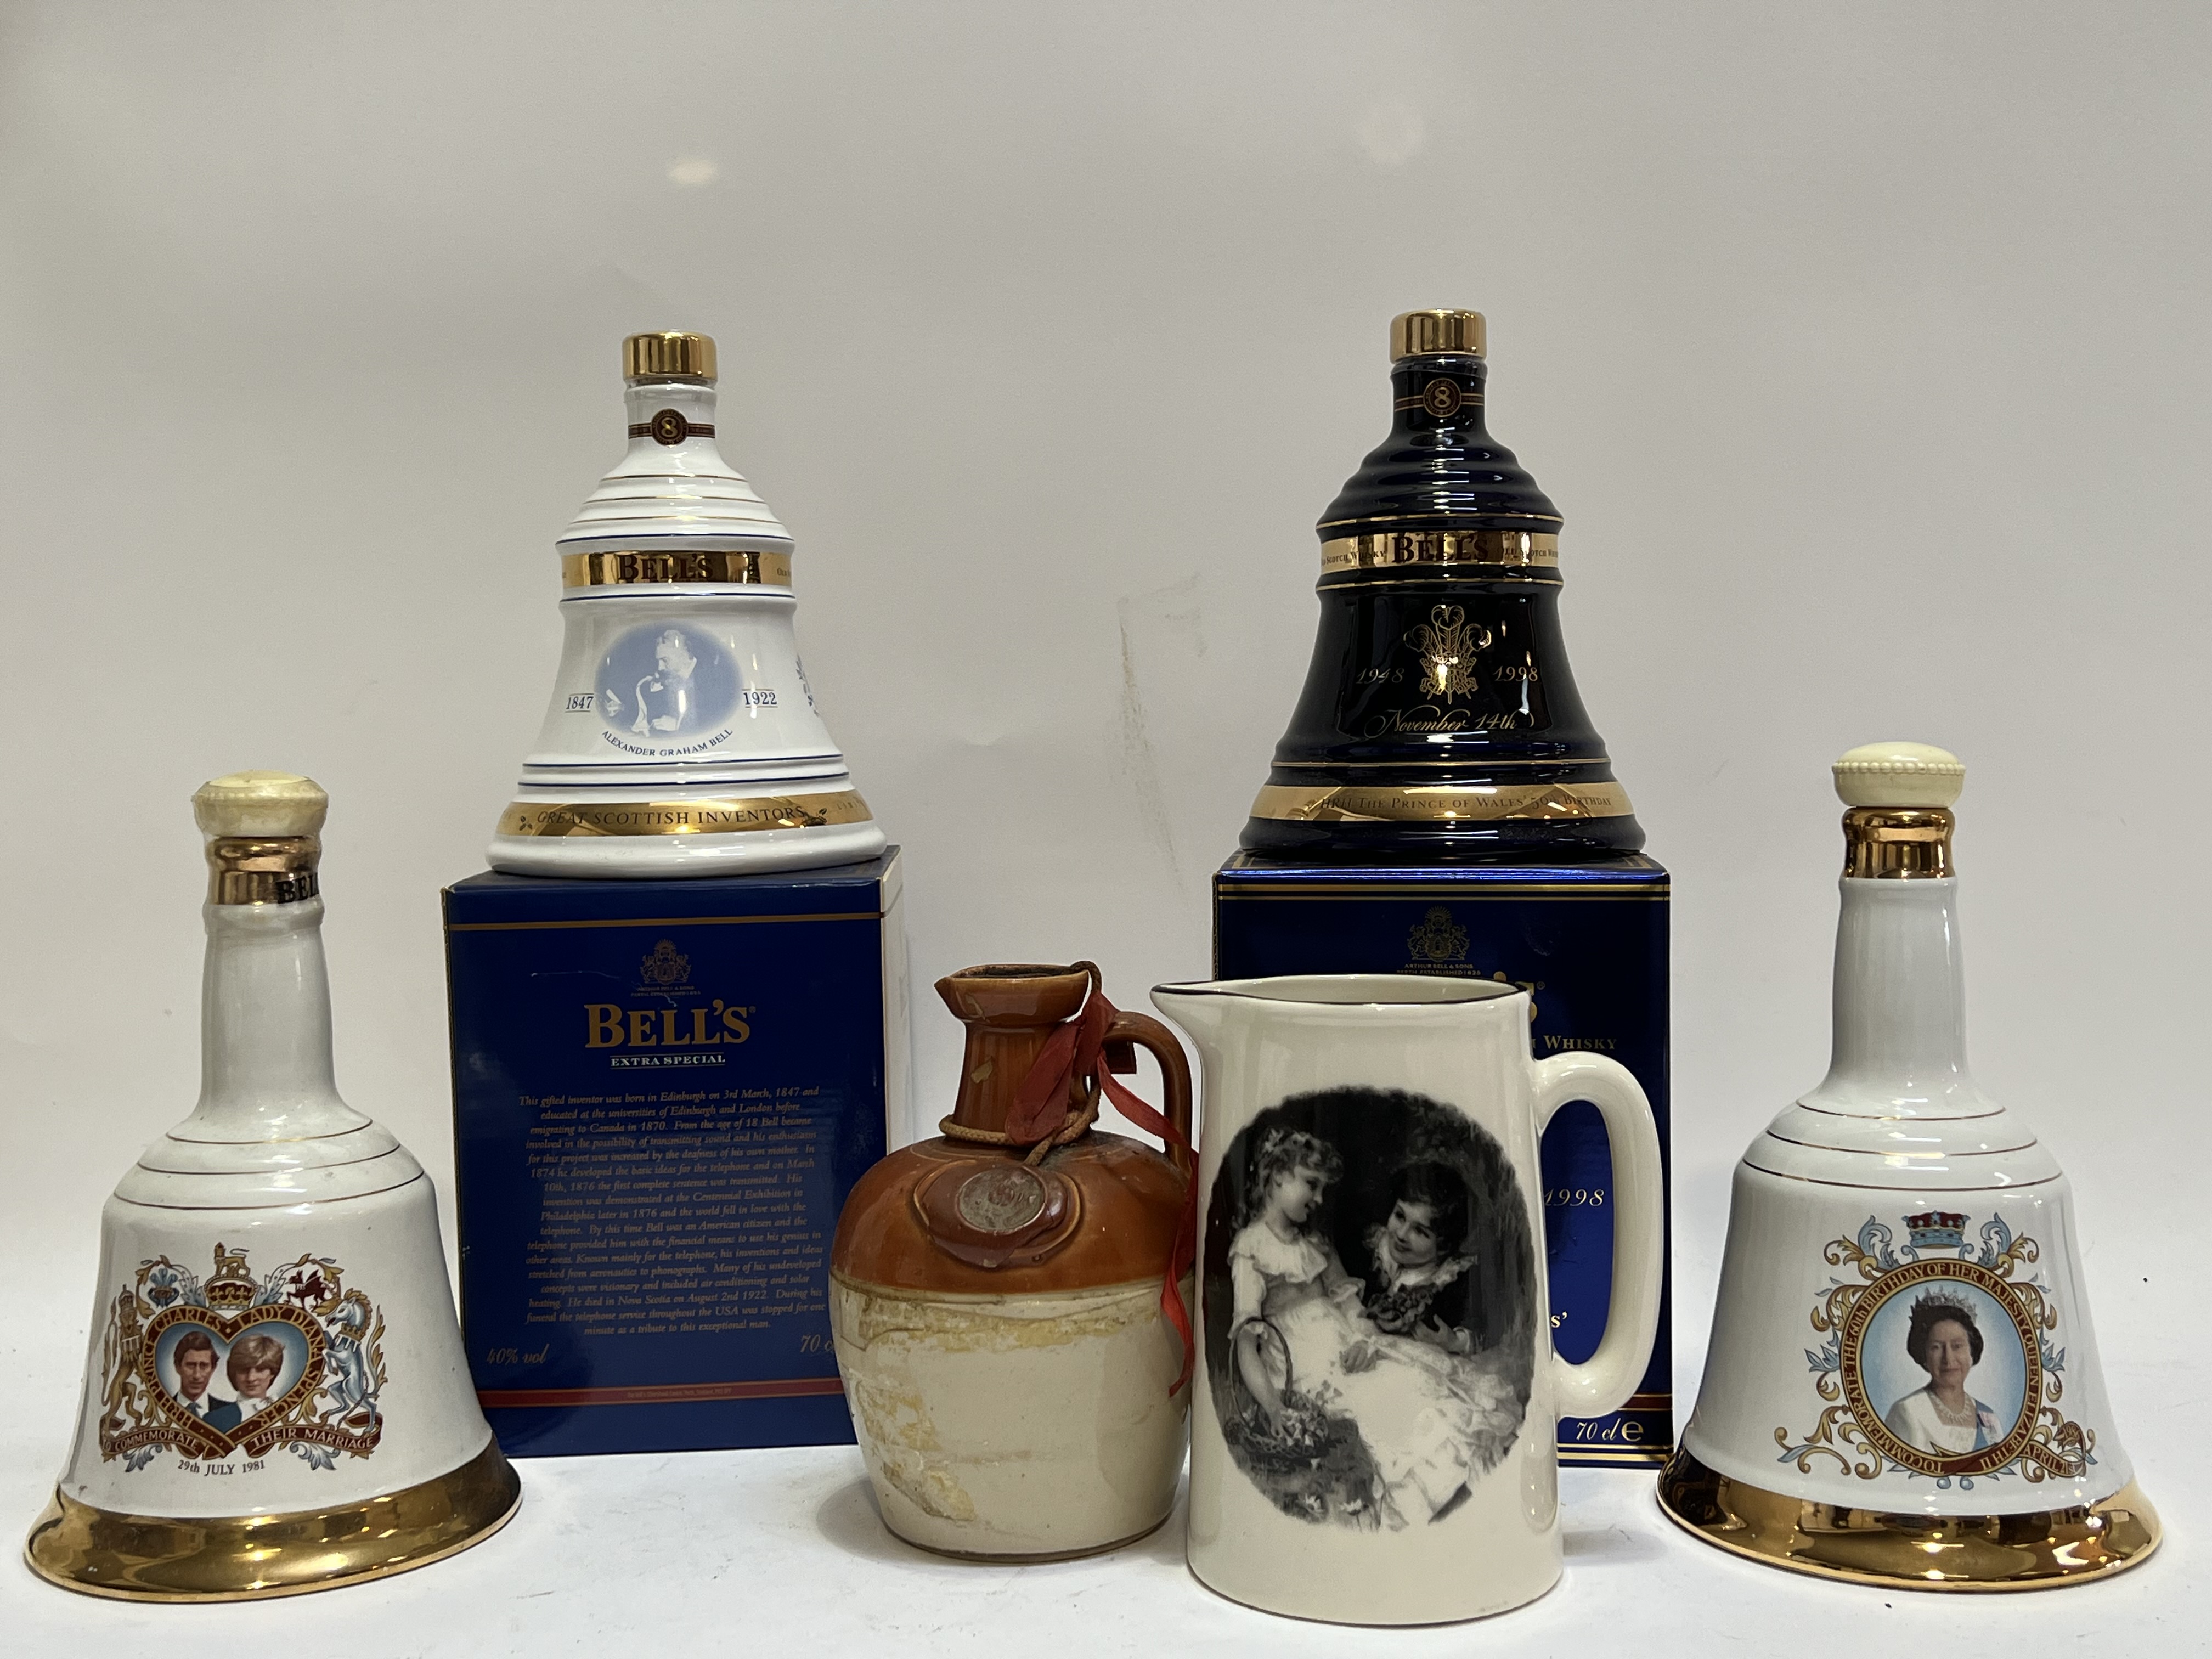 Four bottles of Bell's commemorative whisky comprising a 1981 Charles and Diana 75cl bottle, a - Image 2 of 2